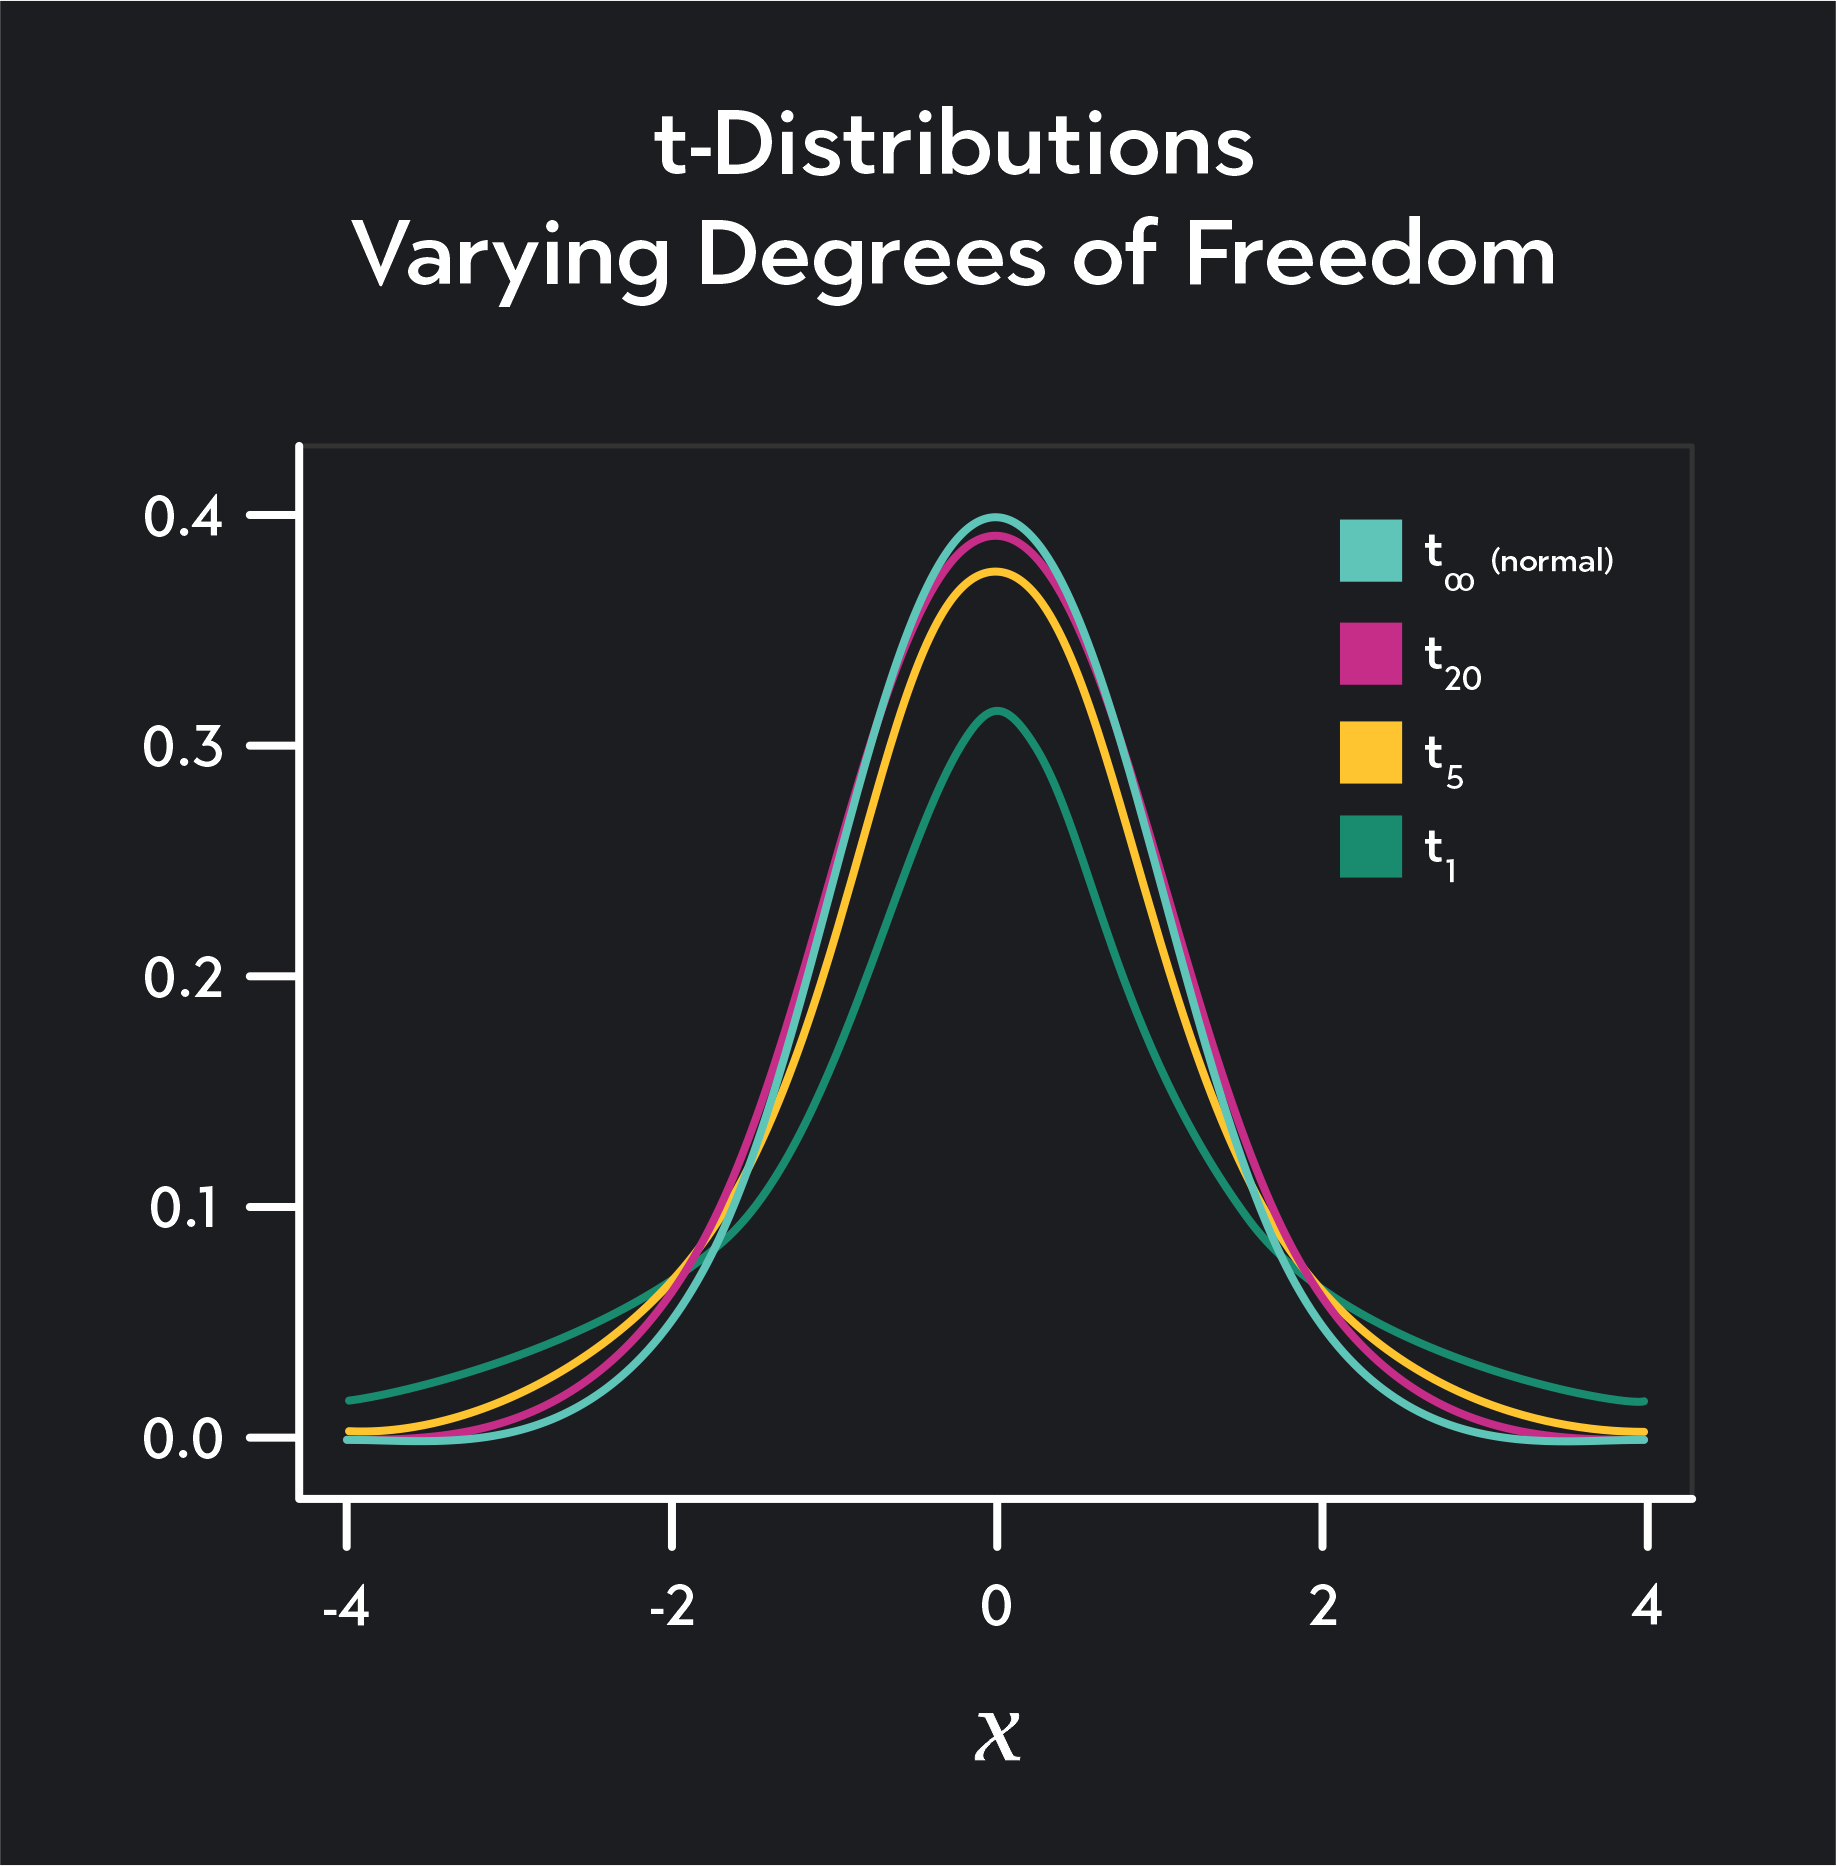 t-distributions varying degrees of freedom